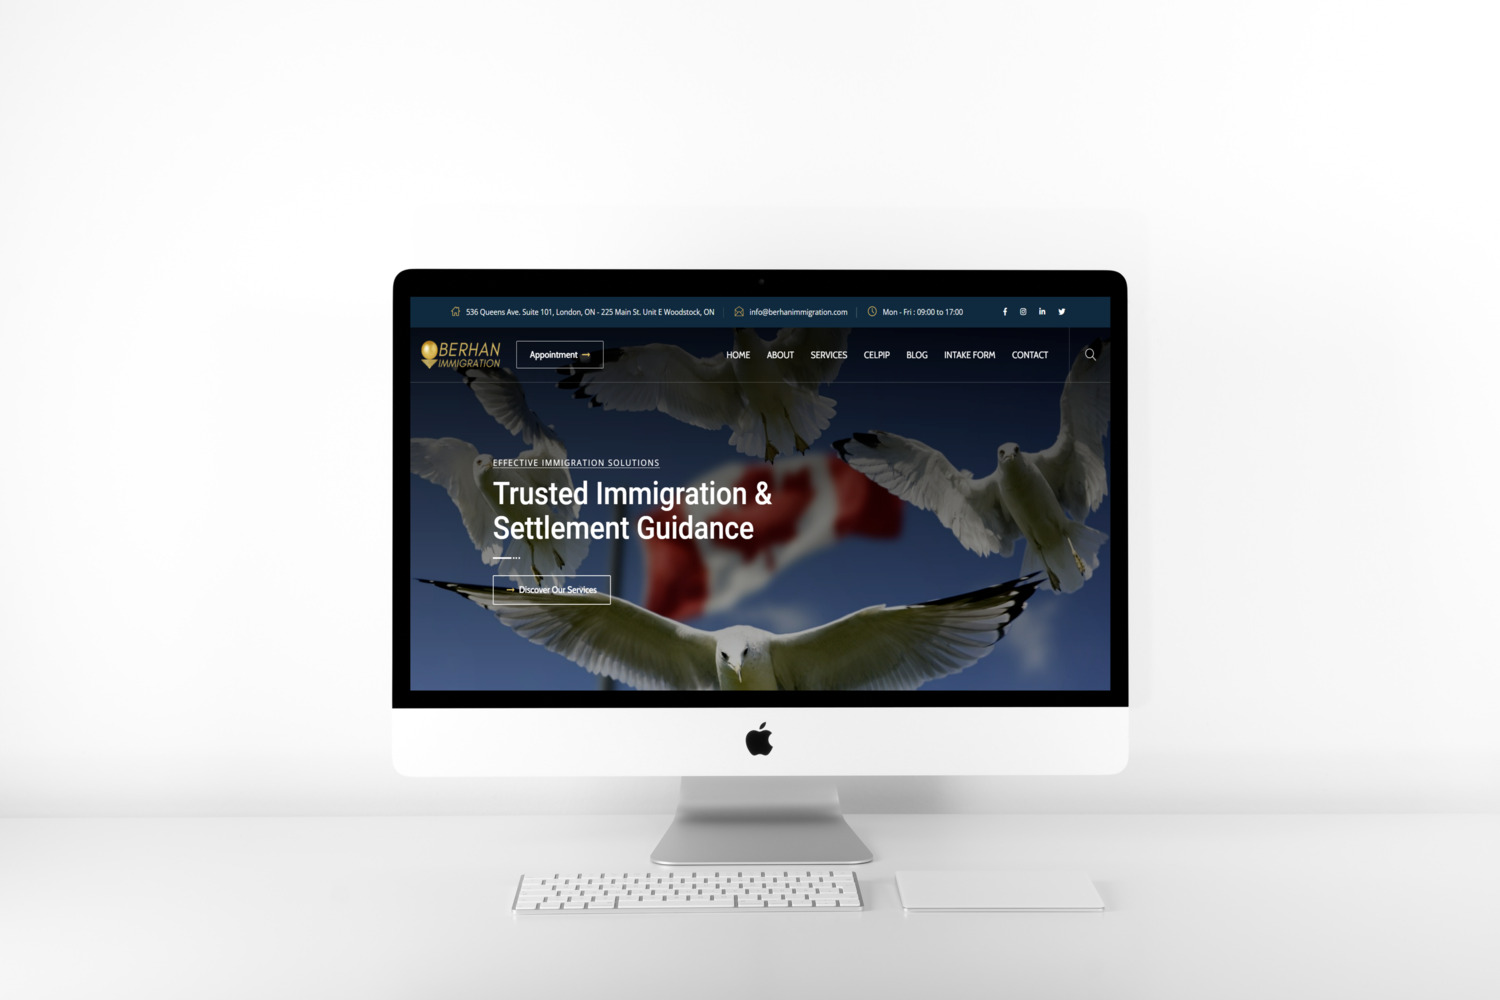 Immigration Consulting Website